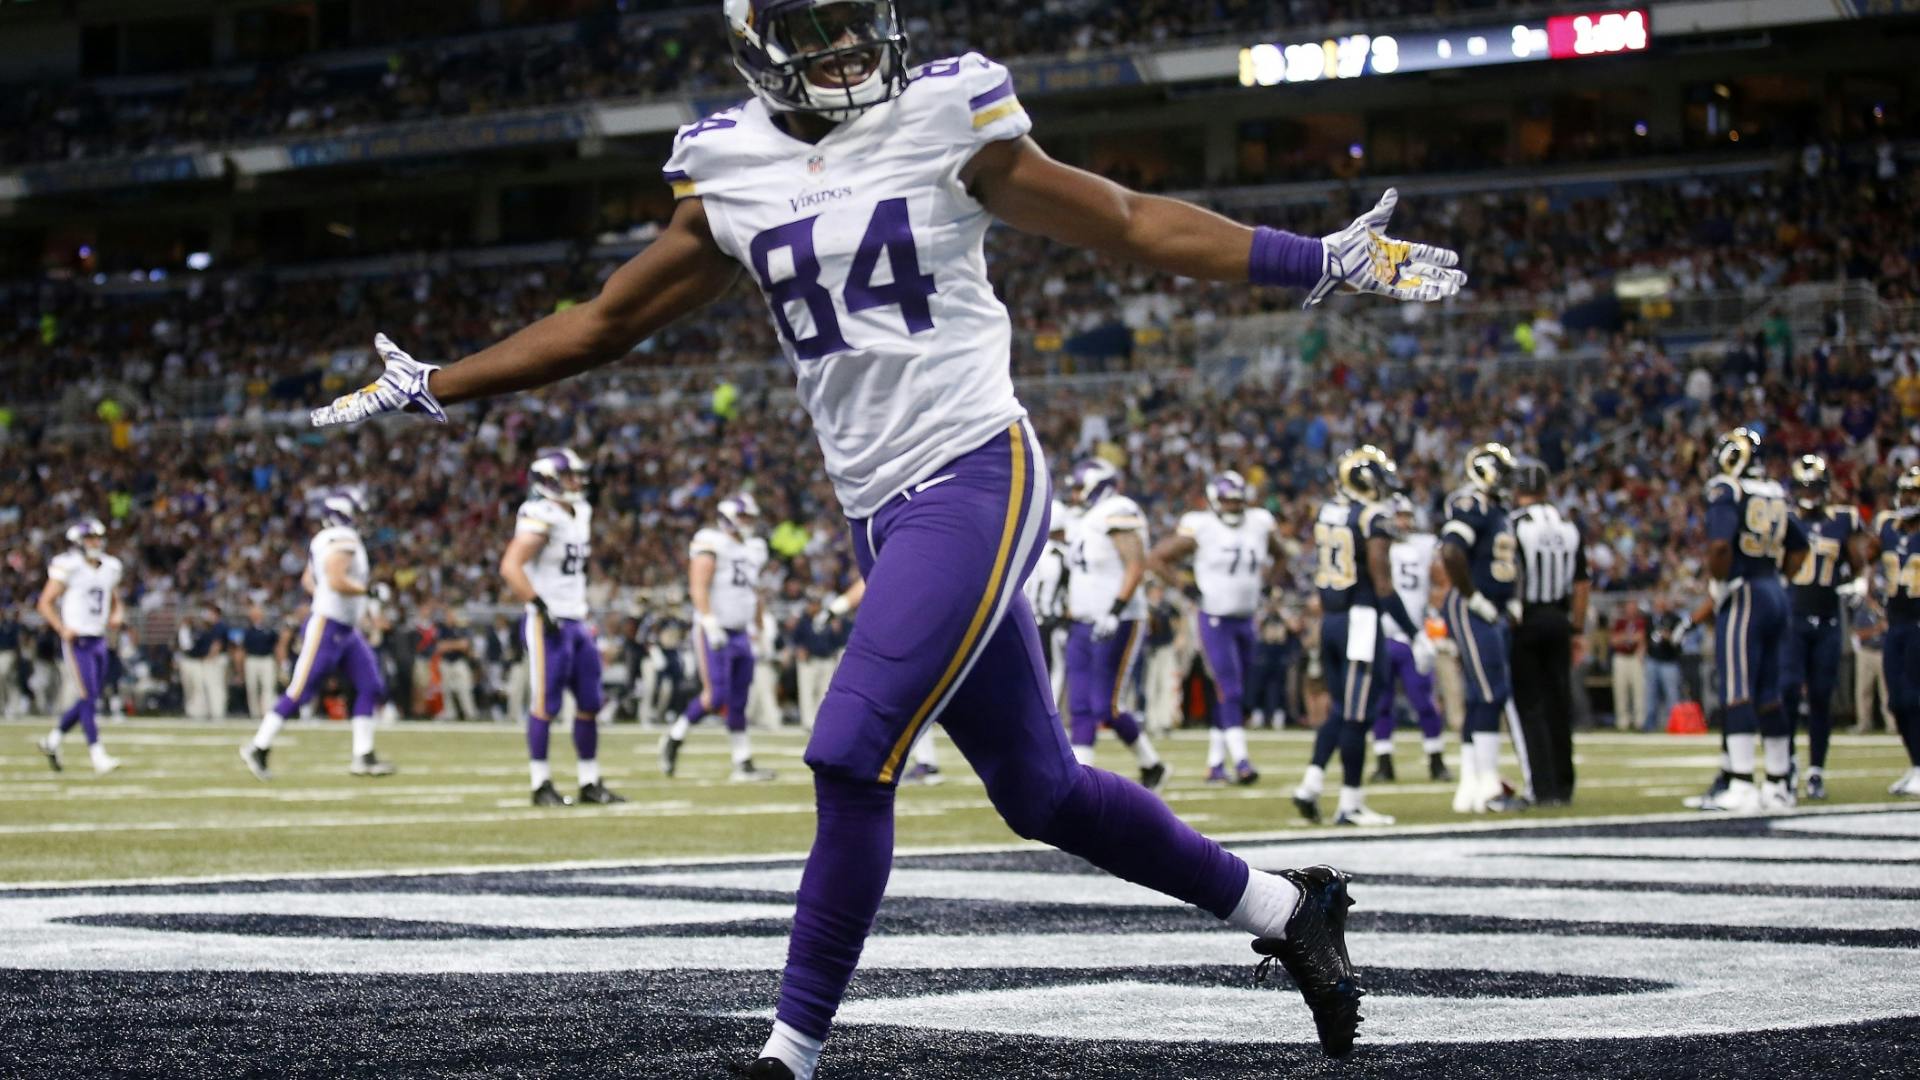 Vikings wide reciever Cordarrelle Patterson silenced the Edward Jones Dome on a 67-yard touchdown run to help the Vikings defeat the Rams 34-6 on Sunday.